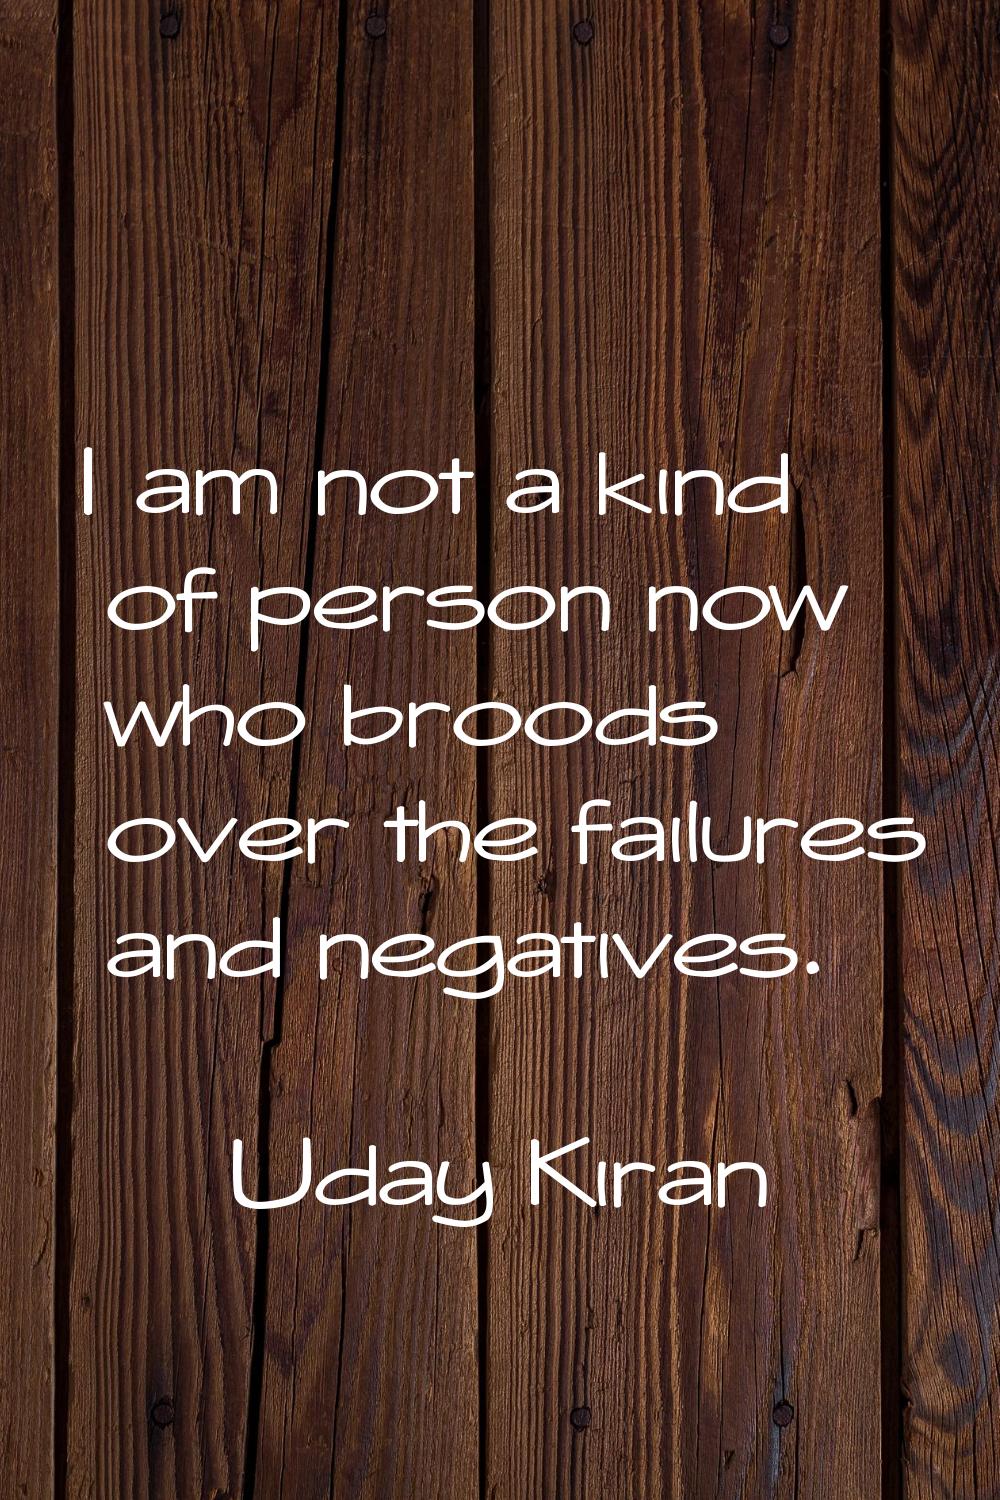 I am not a kind of person now who broods over the failures and negatives.